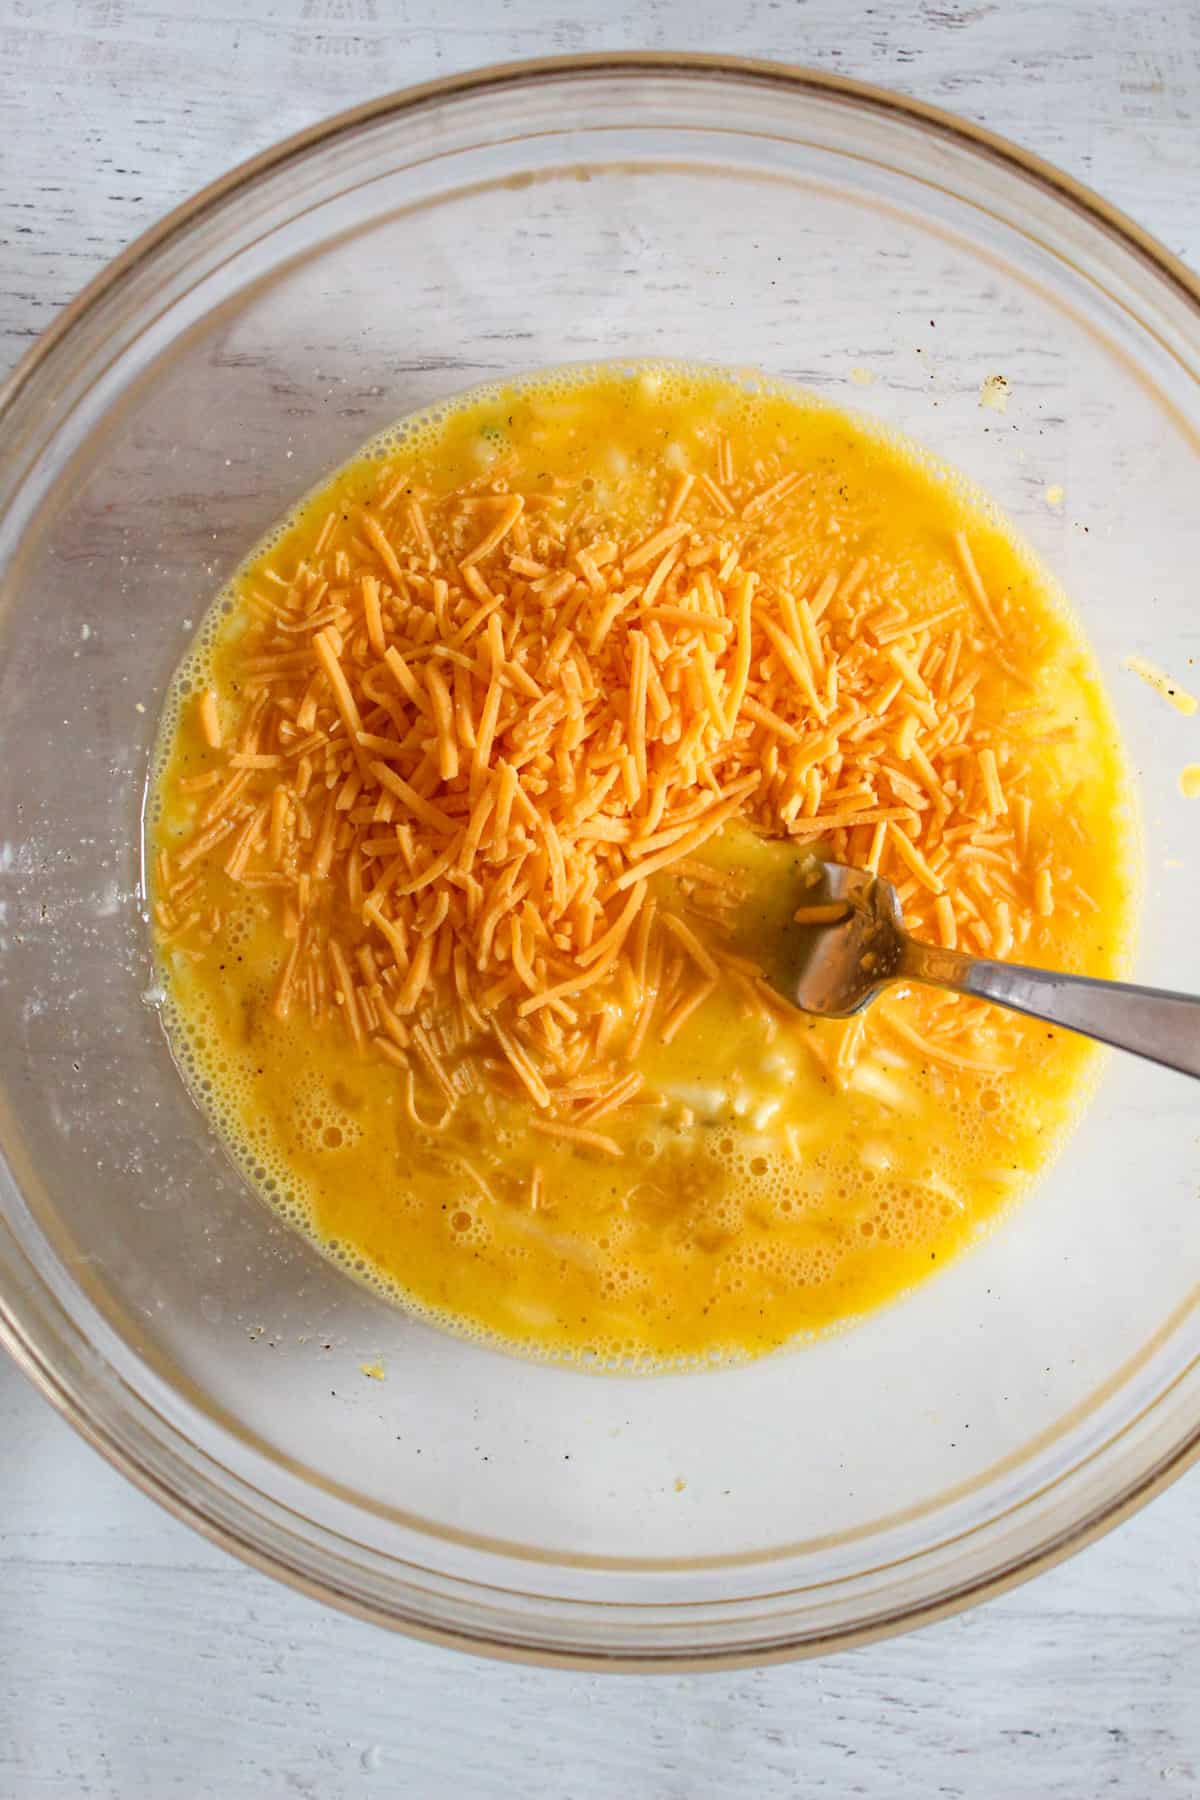 adding shredded cheese to a glass bowl of eggs.